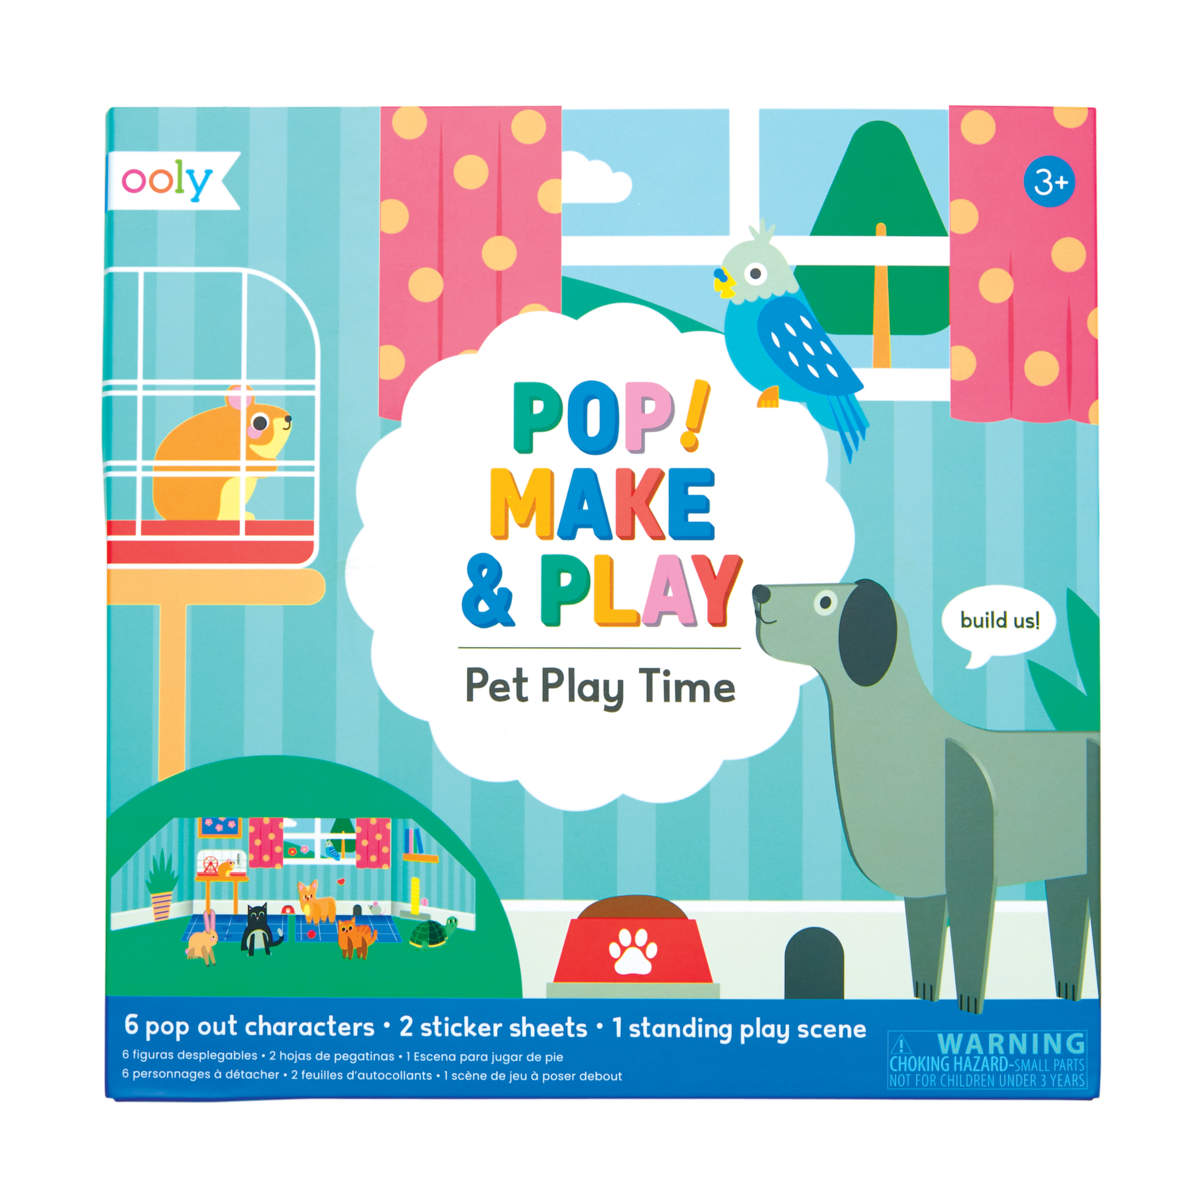 Ooly Pop! Make & Play - Pet Play Time